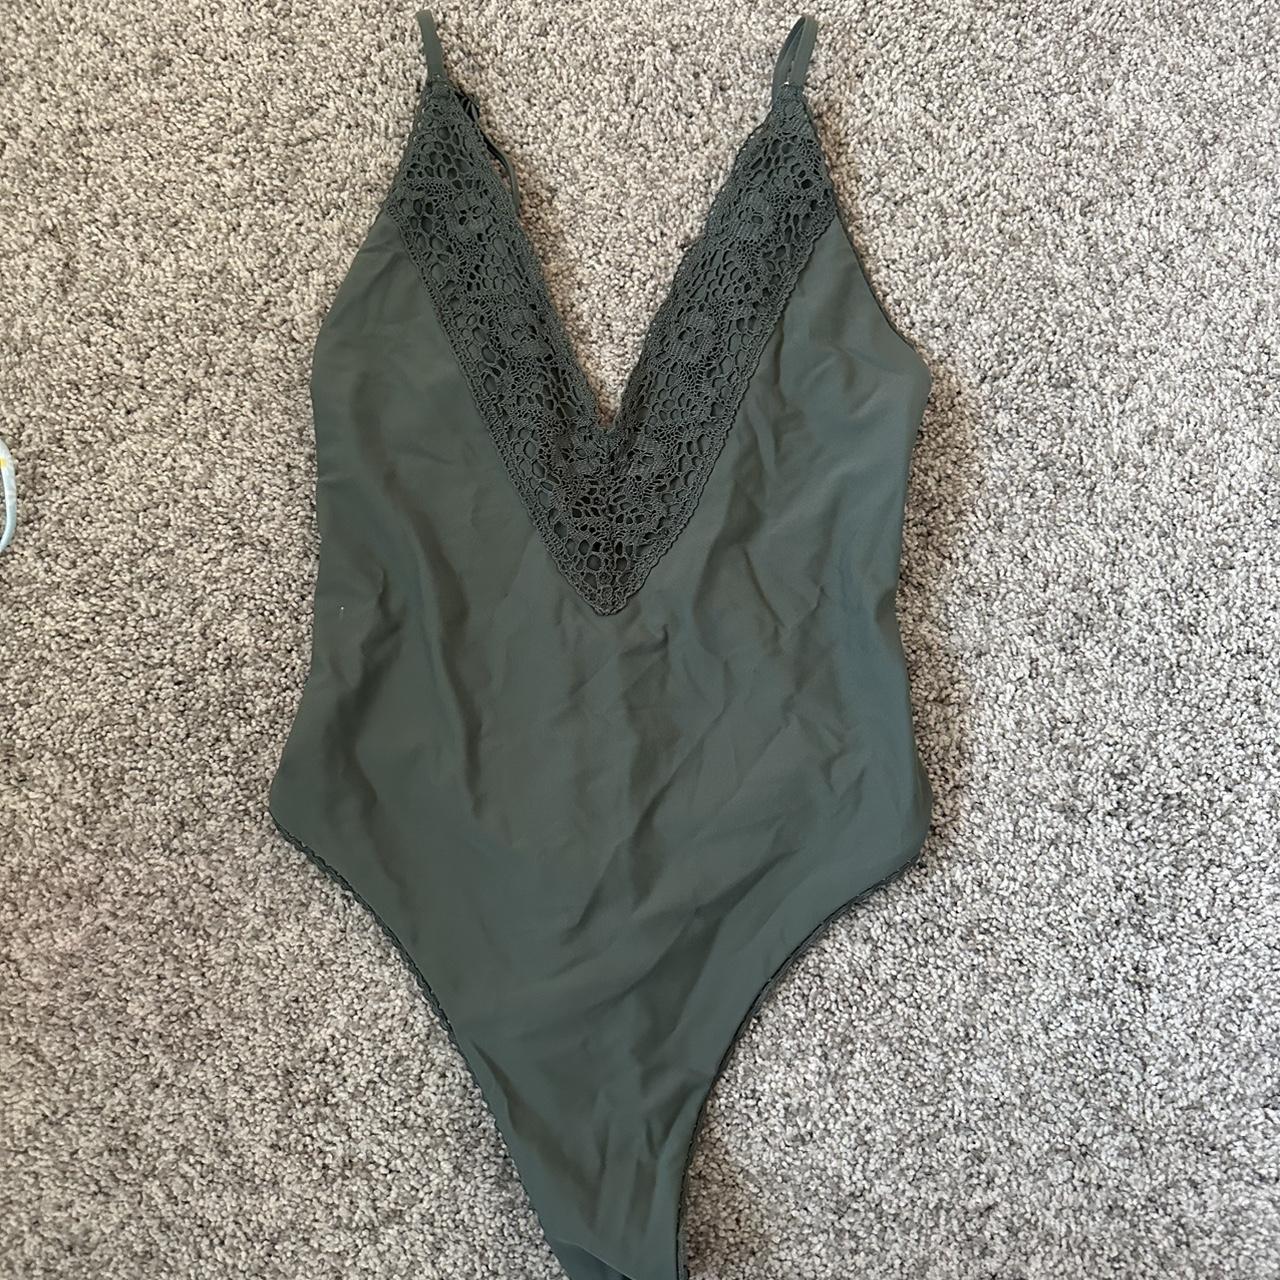 Aerie v-neck one piece swimsuit in this pretty... - Depop